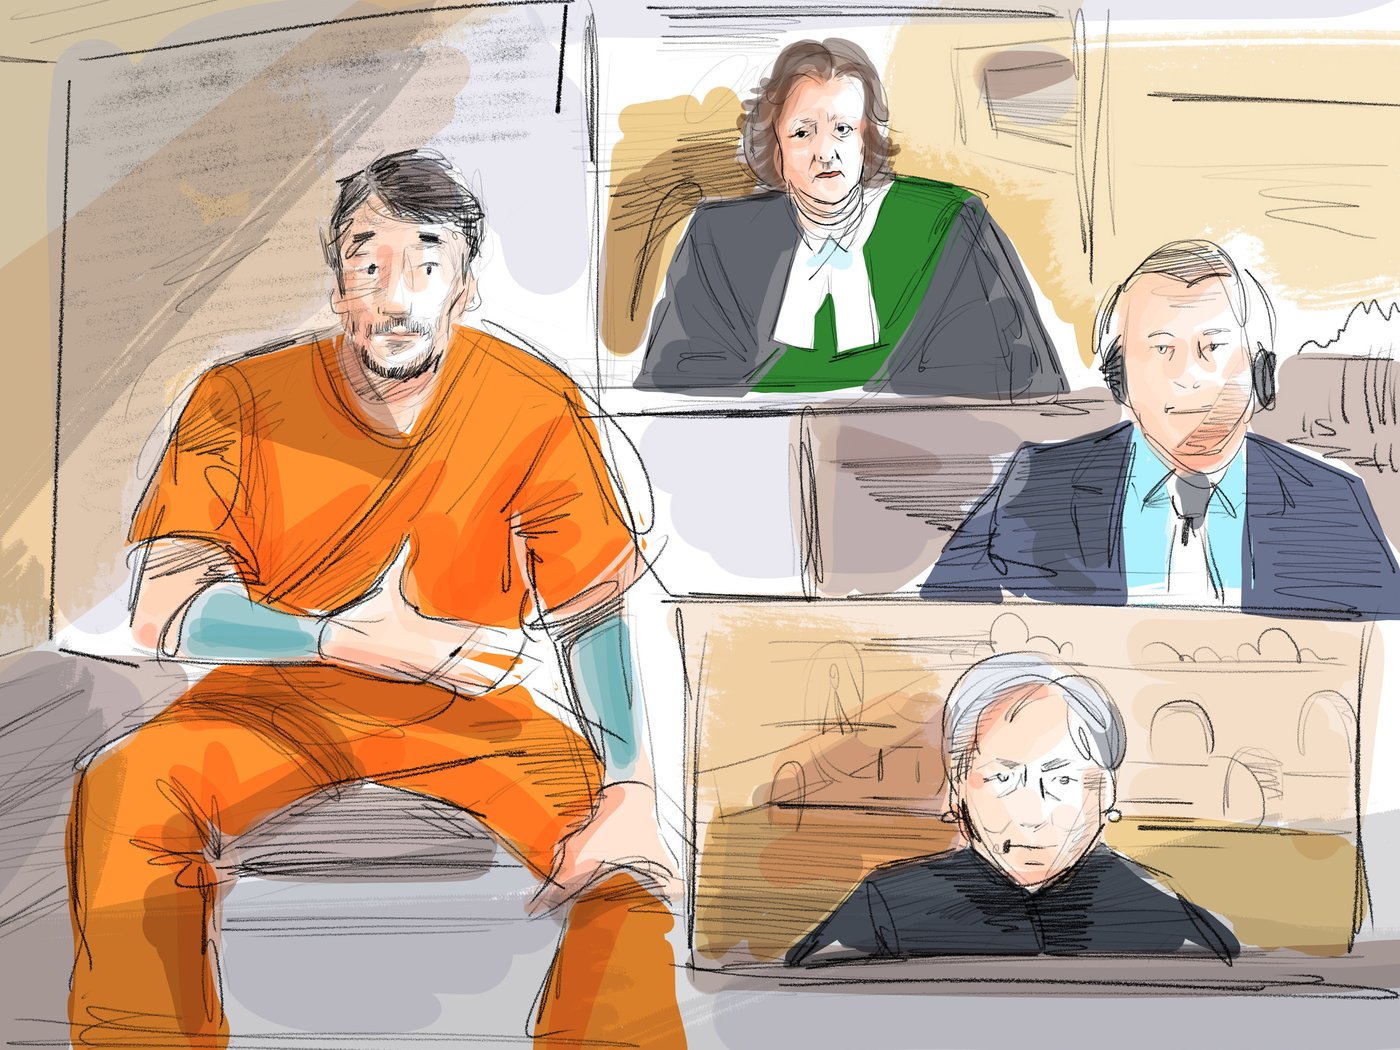 Man accused of setting woman on fire on bus found not criminally responsible: lawyer